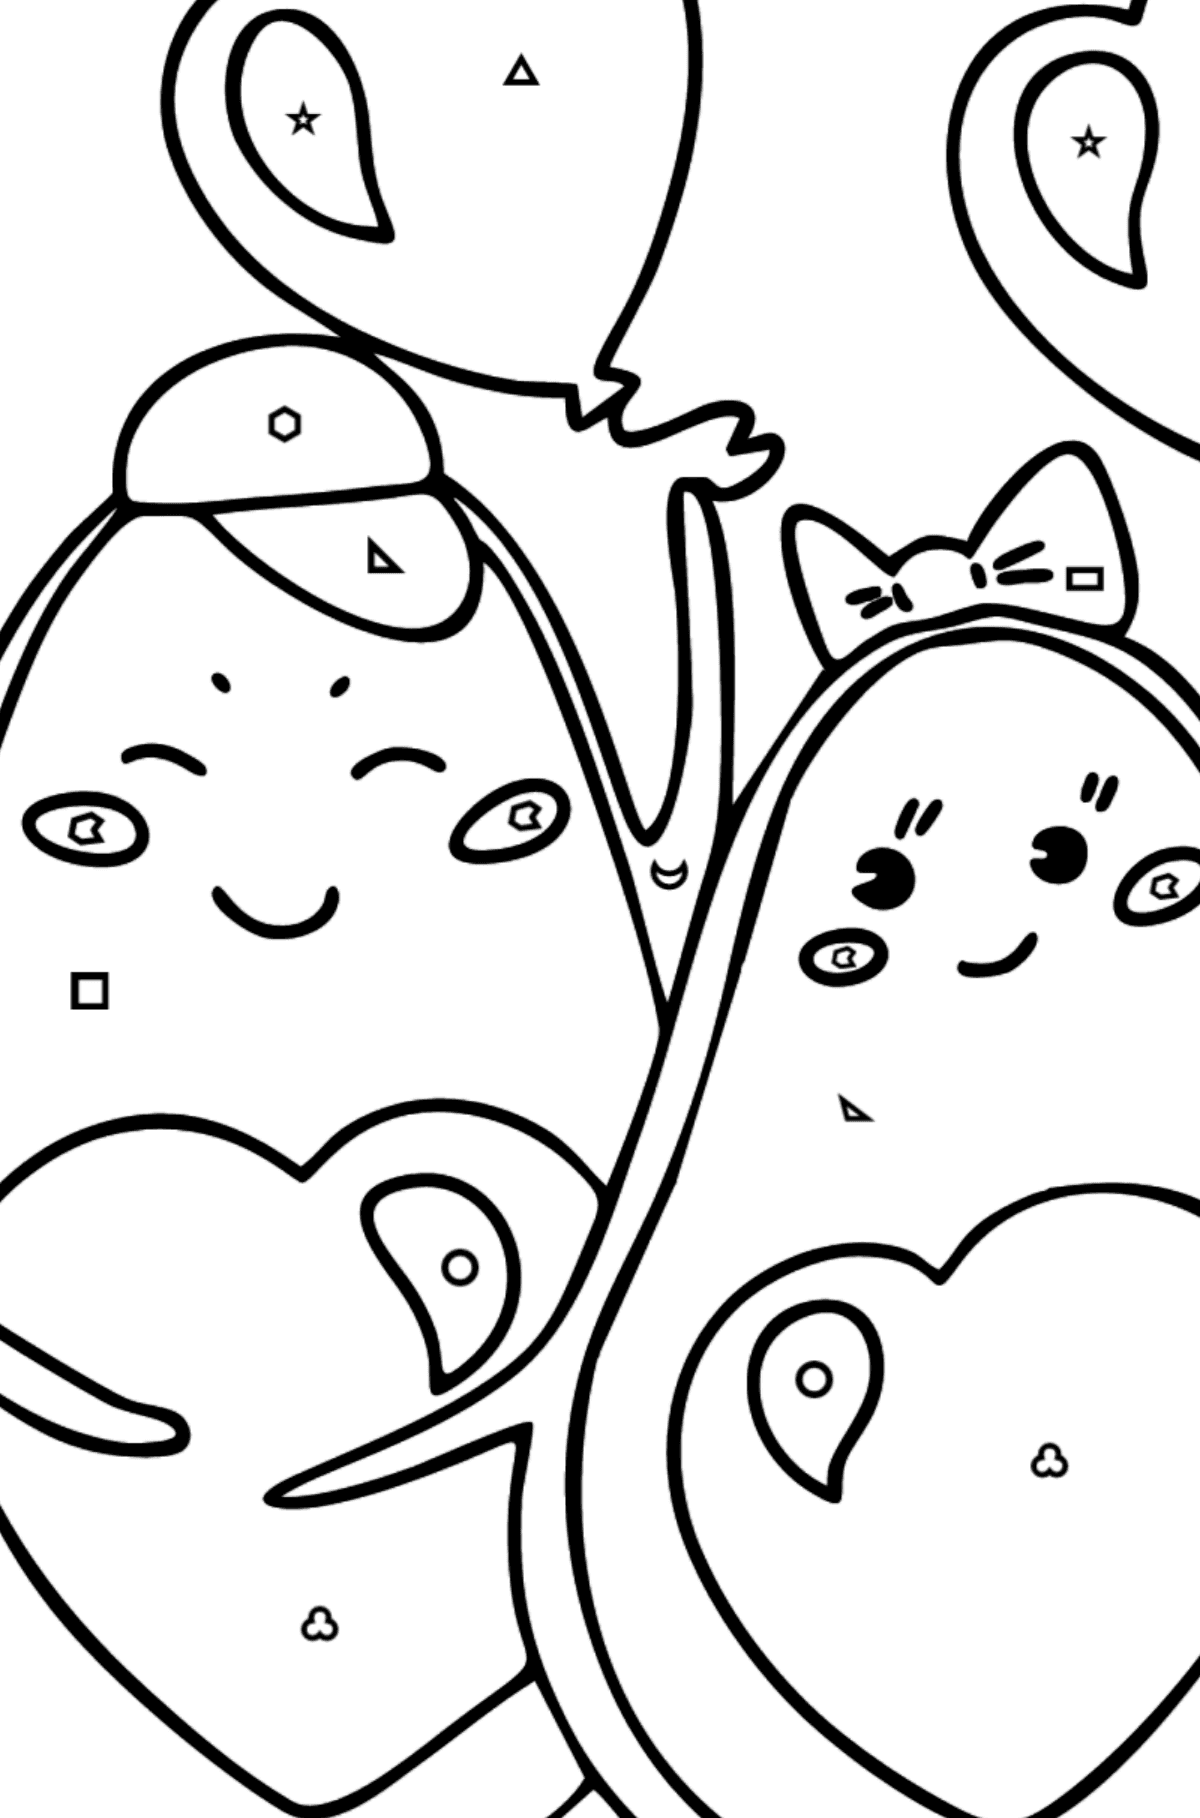 Avocado in Love coloring page - Coloring by Geometric Shapes for Kids